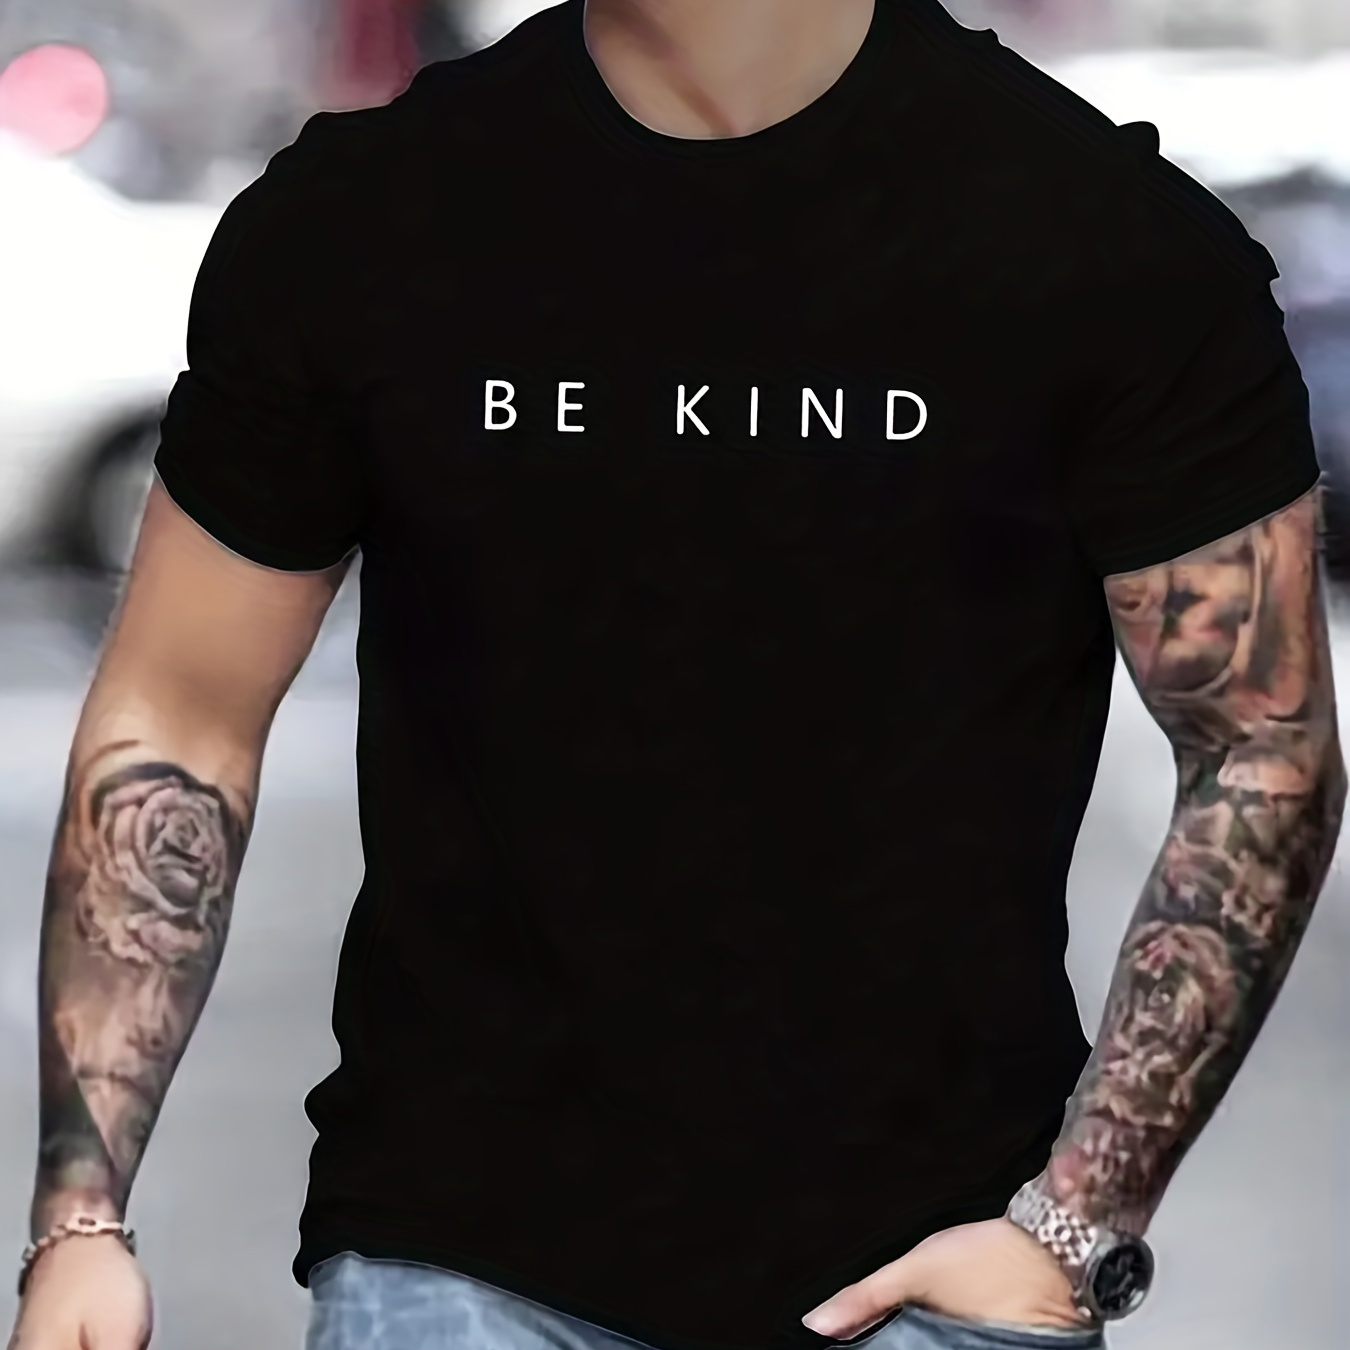 

'be Kind' Print T Shirt, Tees For Men, Casual Short Sleeve Tshirt For Summer Spring Fall, Tops As Gifts